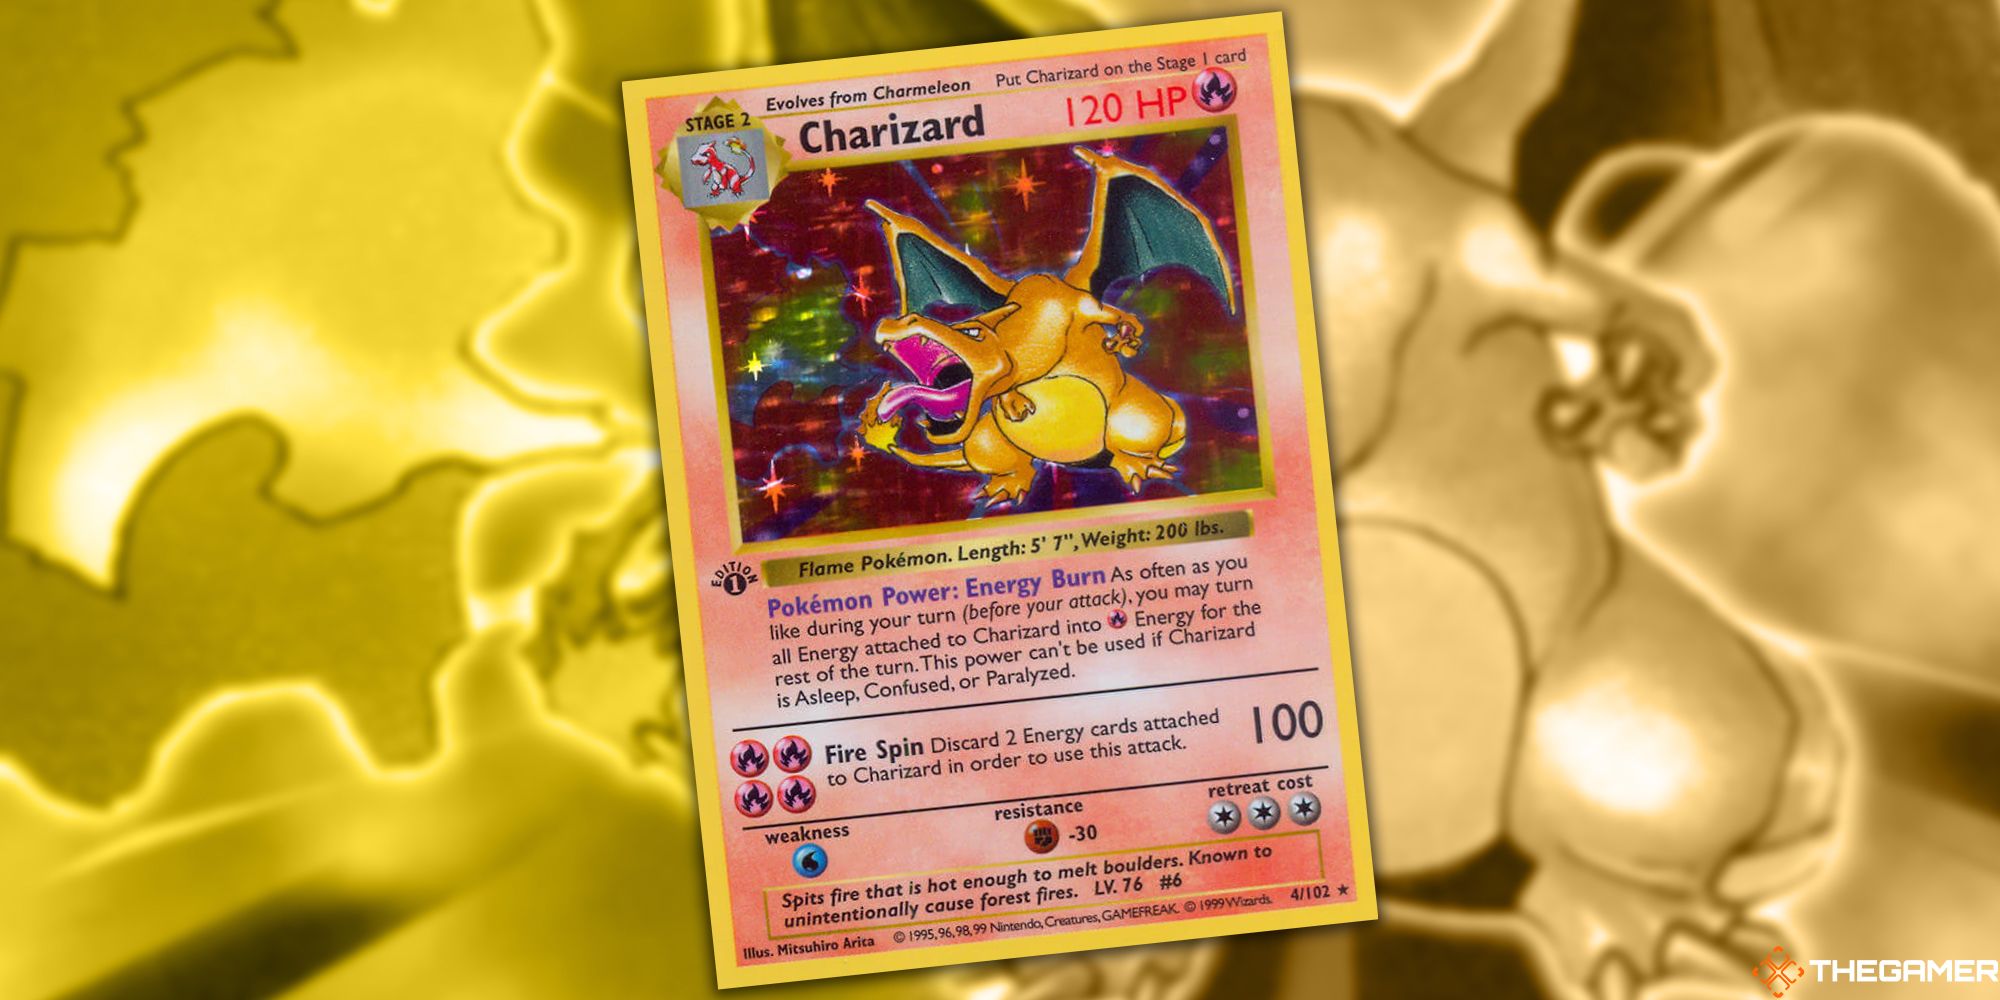 5 of the most expensive Pokemon cards ever sold